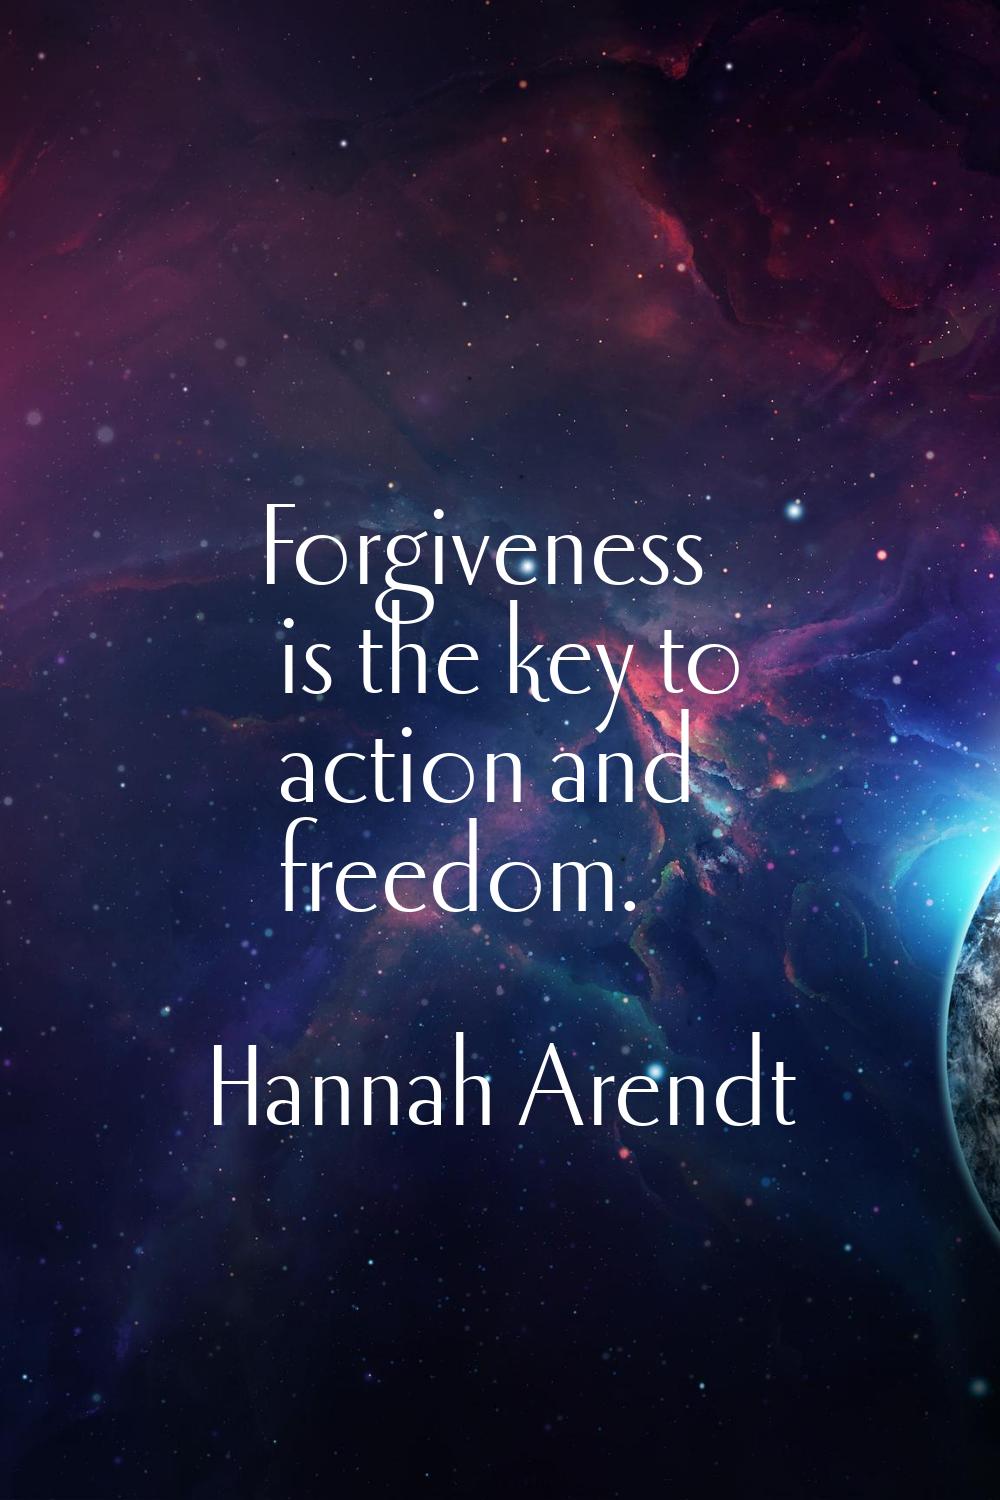 Forgiveness is the key to action and freedom.